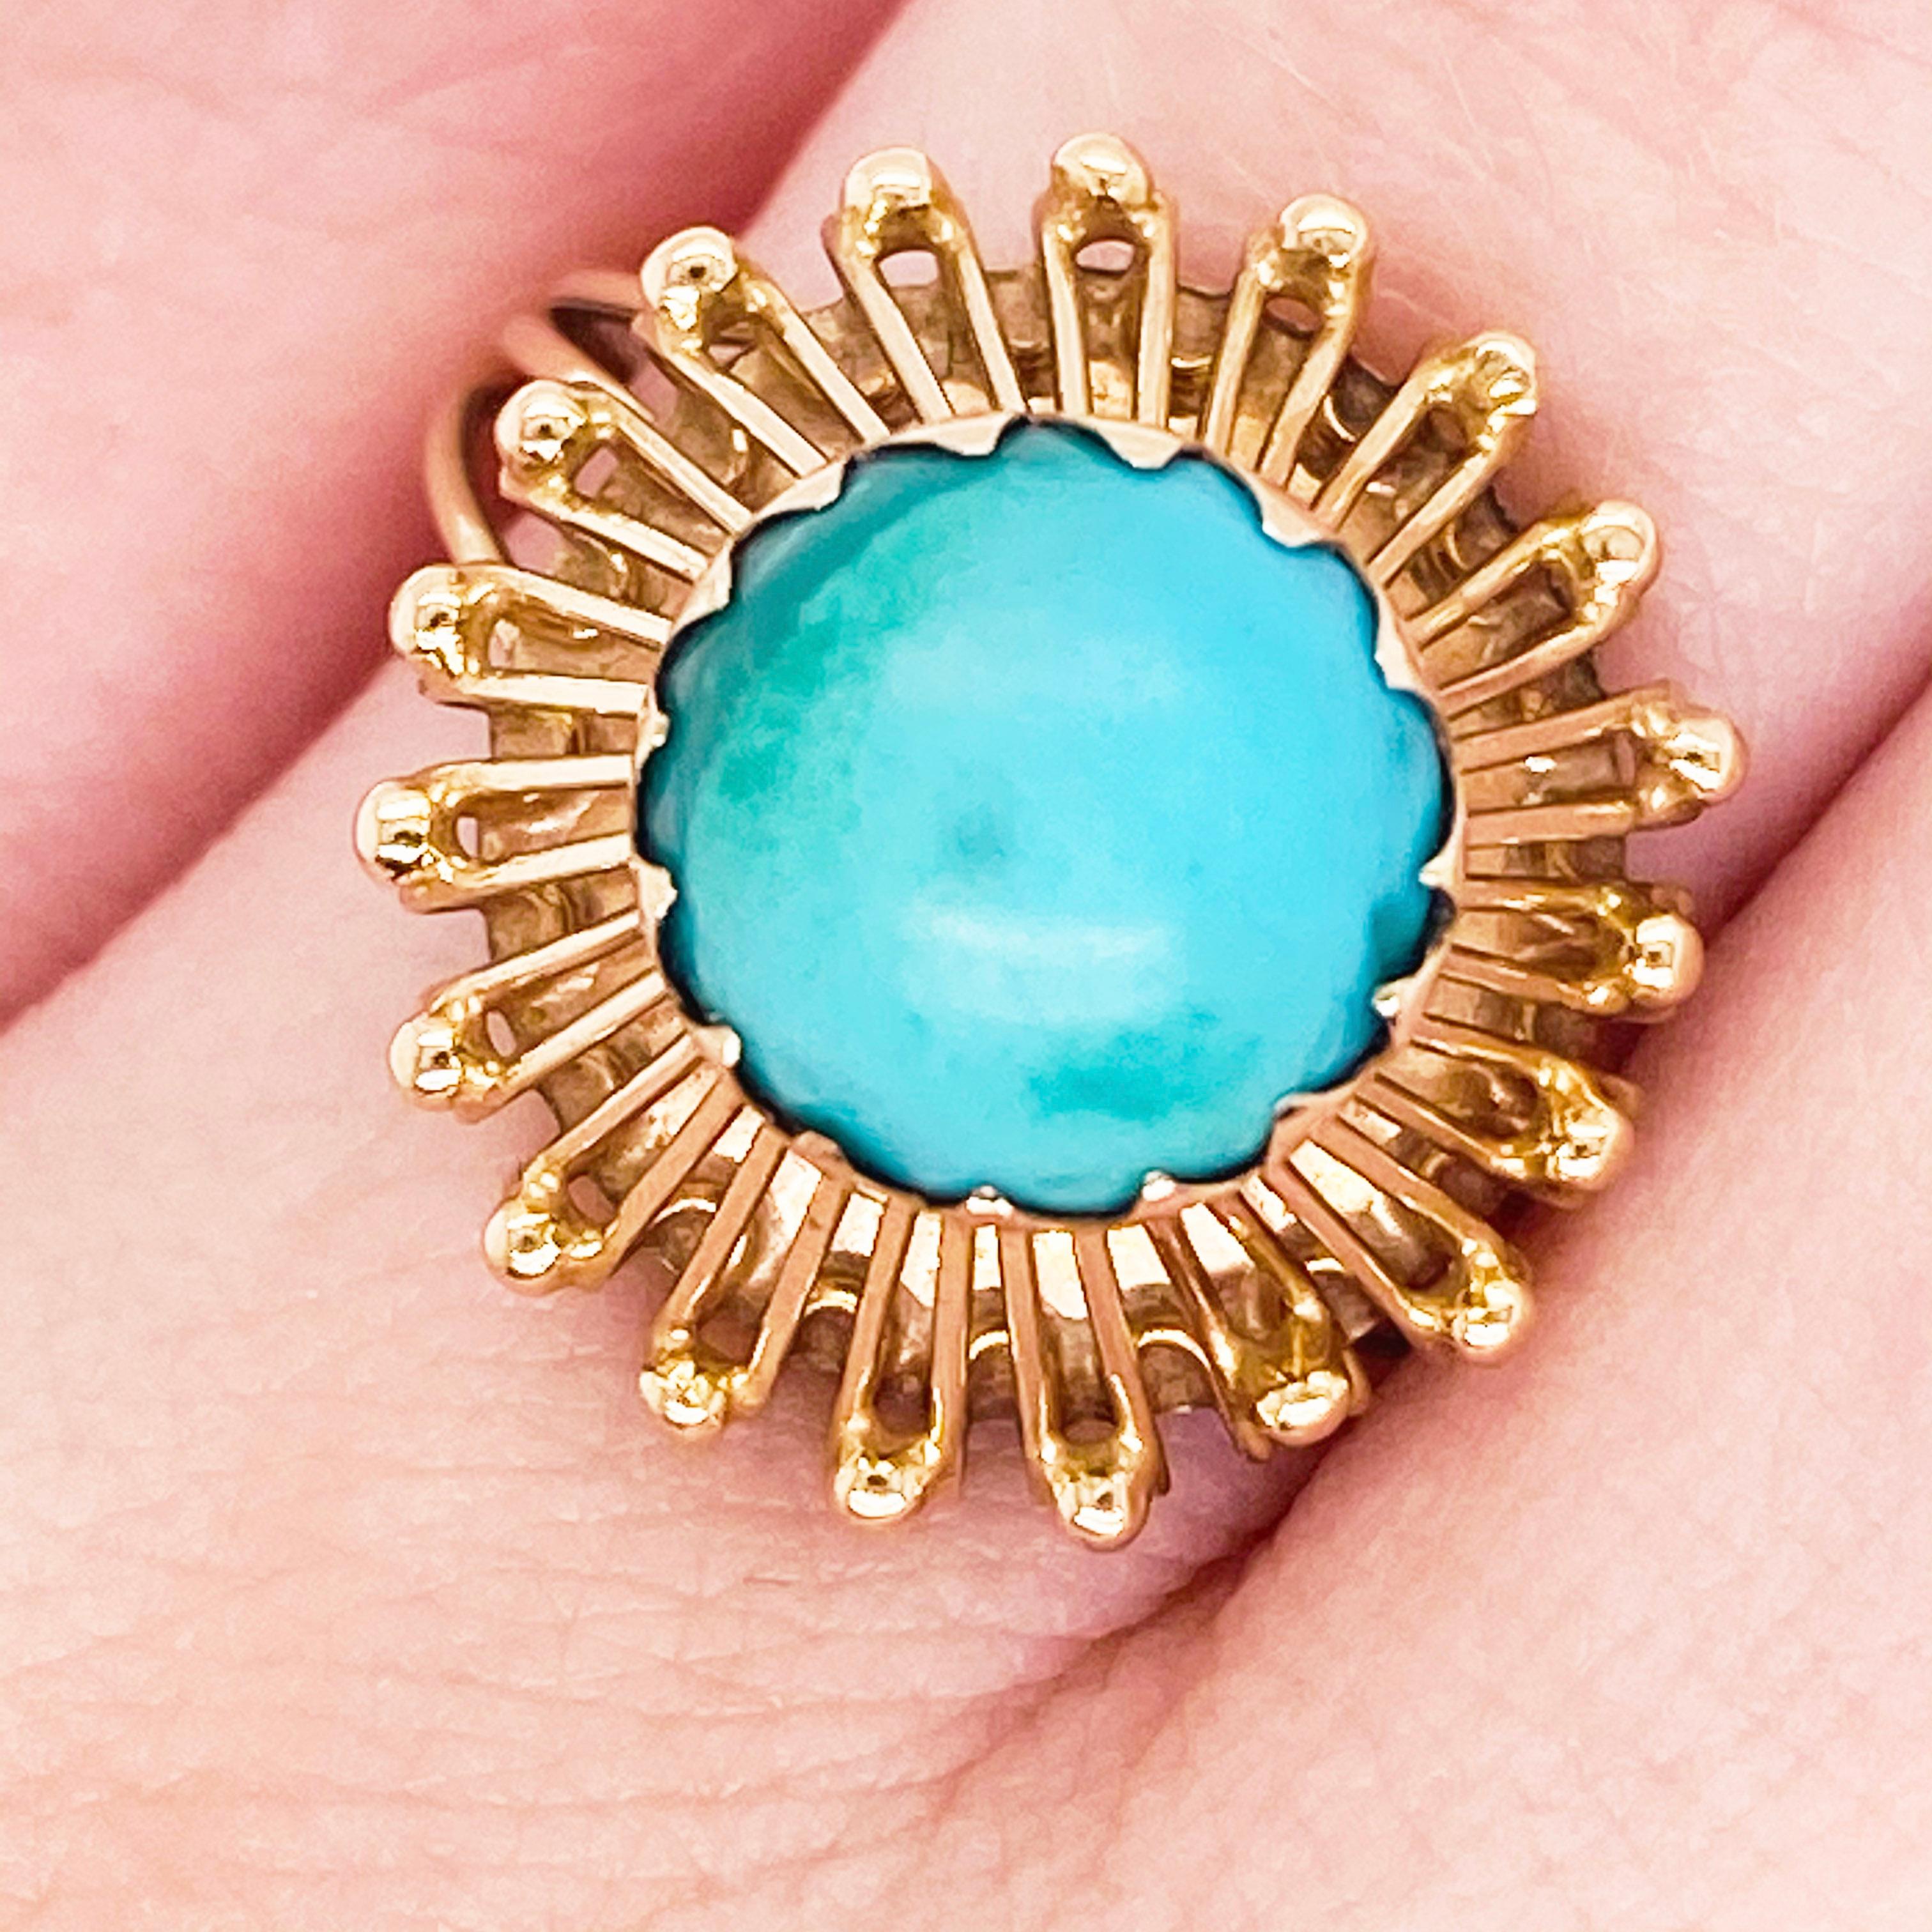 In many cultures of the Old and New Worlds, turquoise has been esteemed for thousands of years as a holy stone, a bringer of good fortune or a talisman. It is a stone of protection, strong and opaque, yet soothing to the touch, healing to the eye,